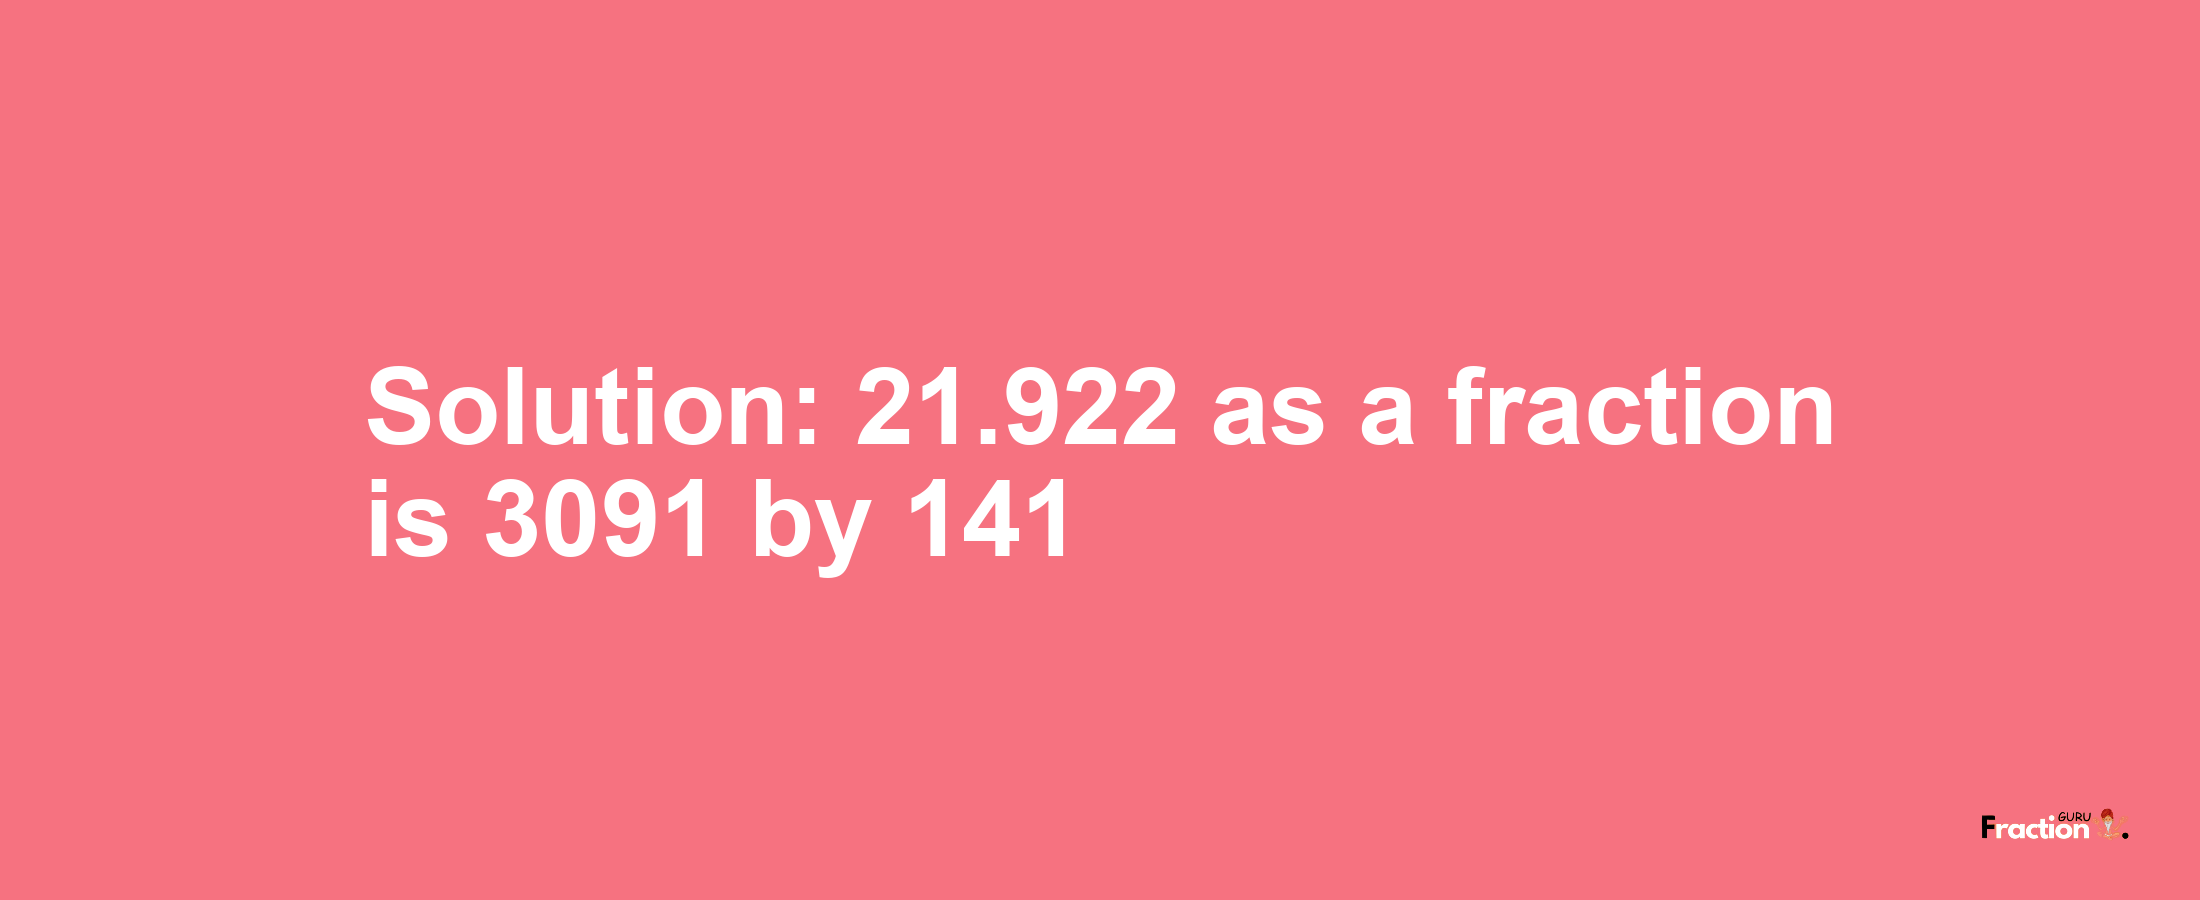 Solution:21.922 as a fraction is 3091/141